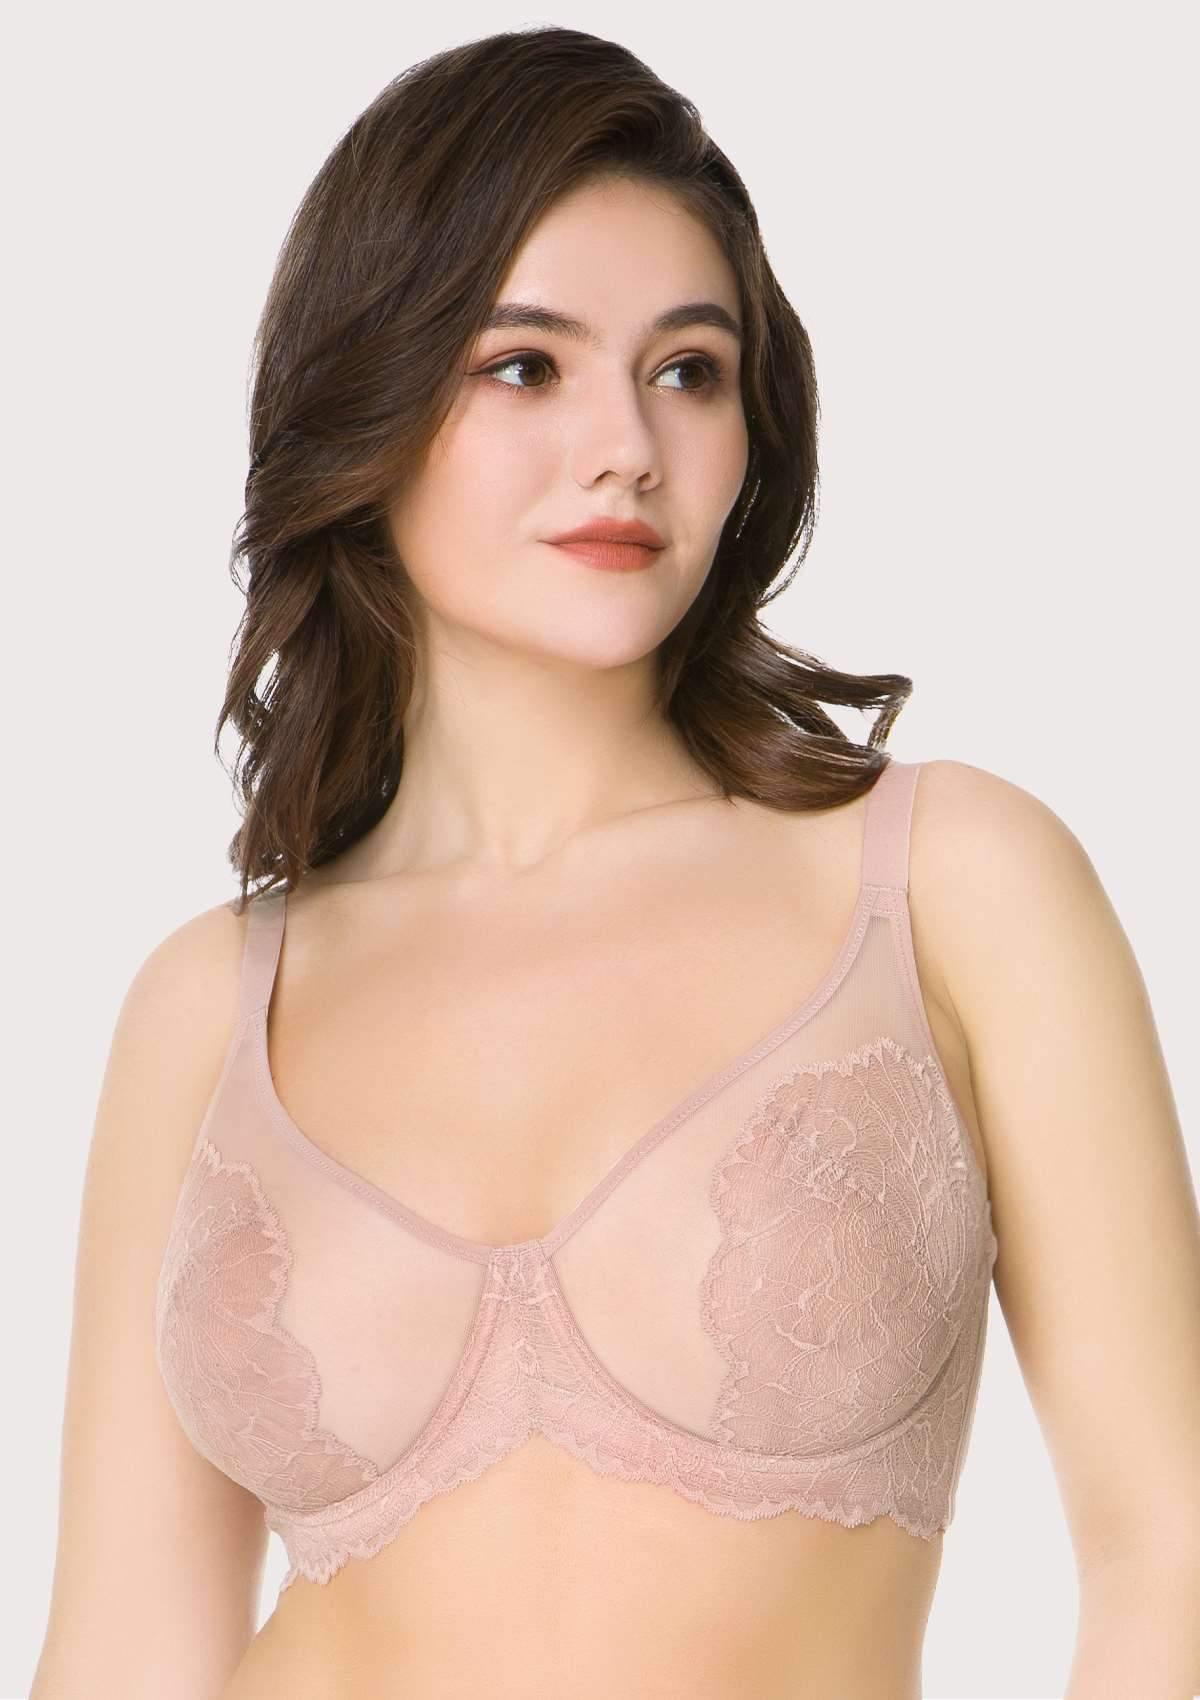 HSIA Blossom Lace Bra And Panties Set: Best Bra For Large Busts - Dark Pink / 42 / D